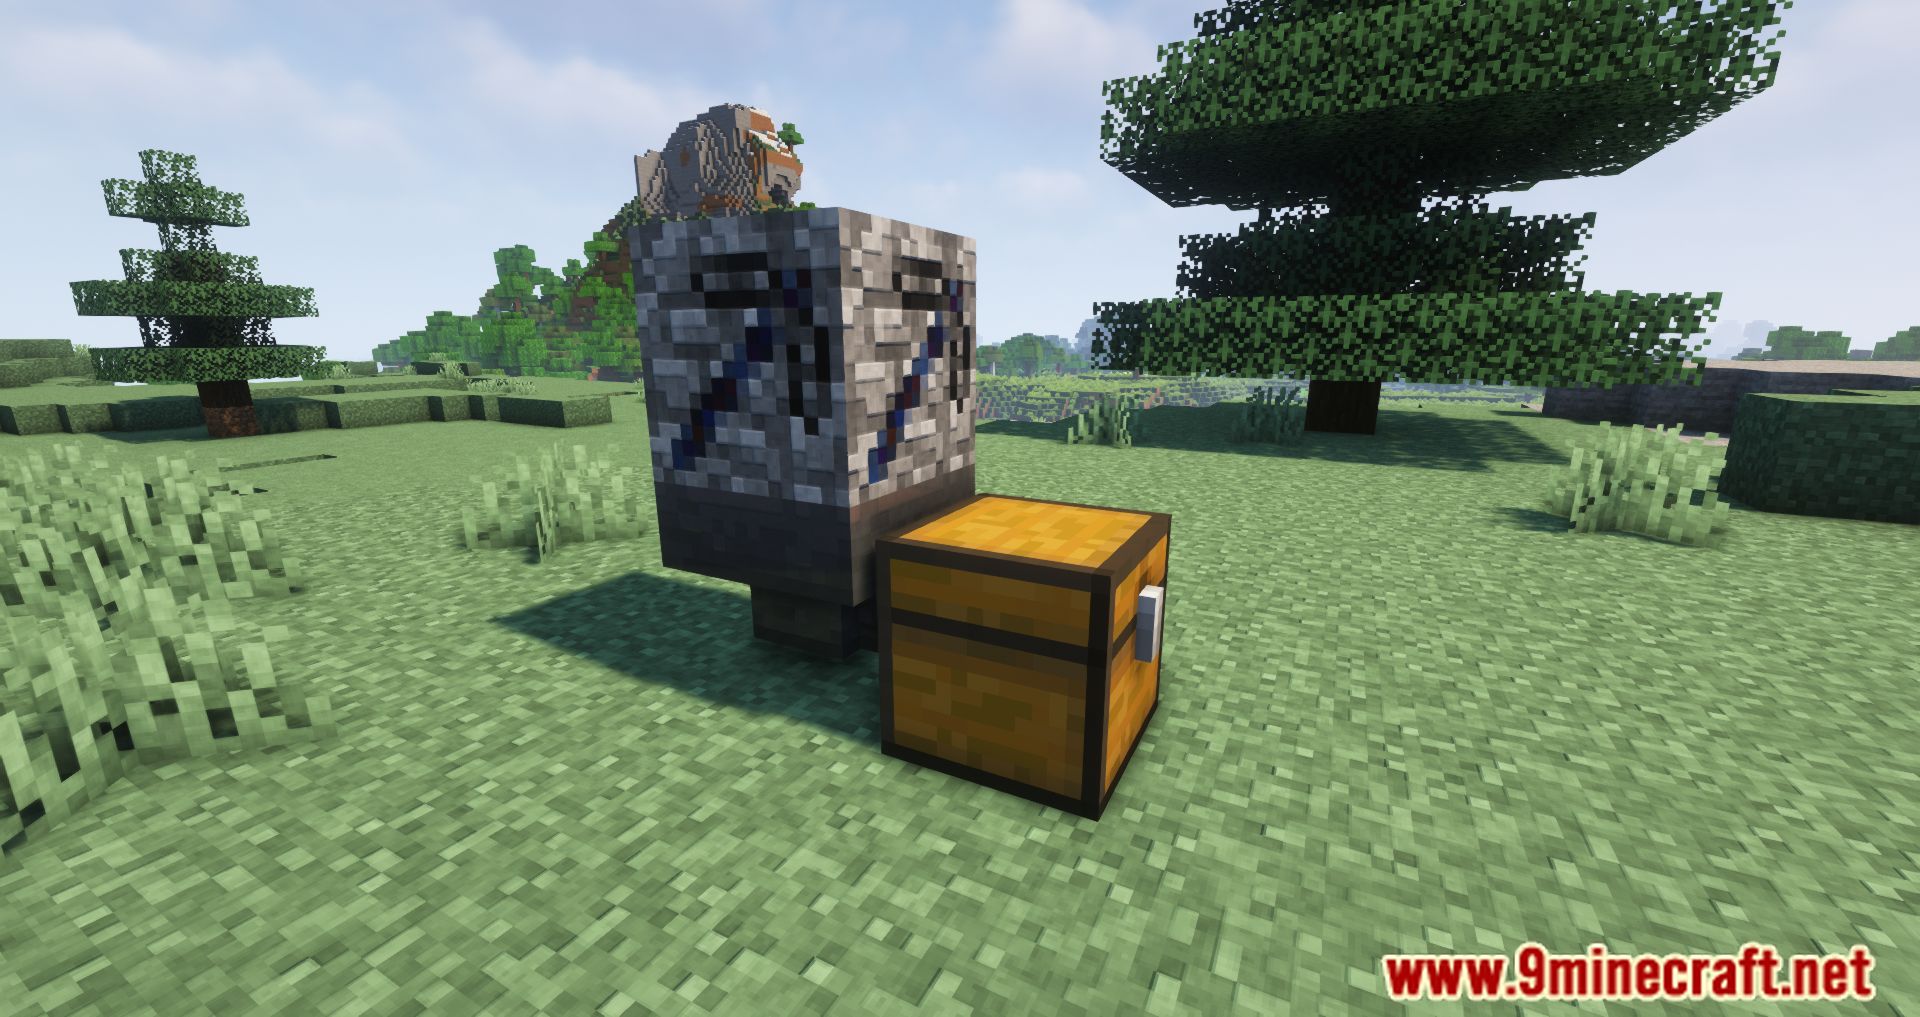 Simple Cobblestone Generator Mod (1.20.4, 1.19.4) - A New Feature Added To The Game 2